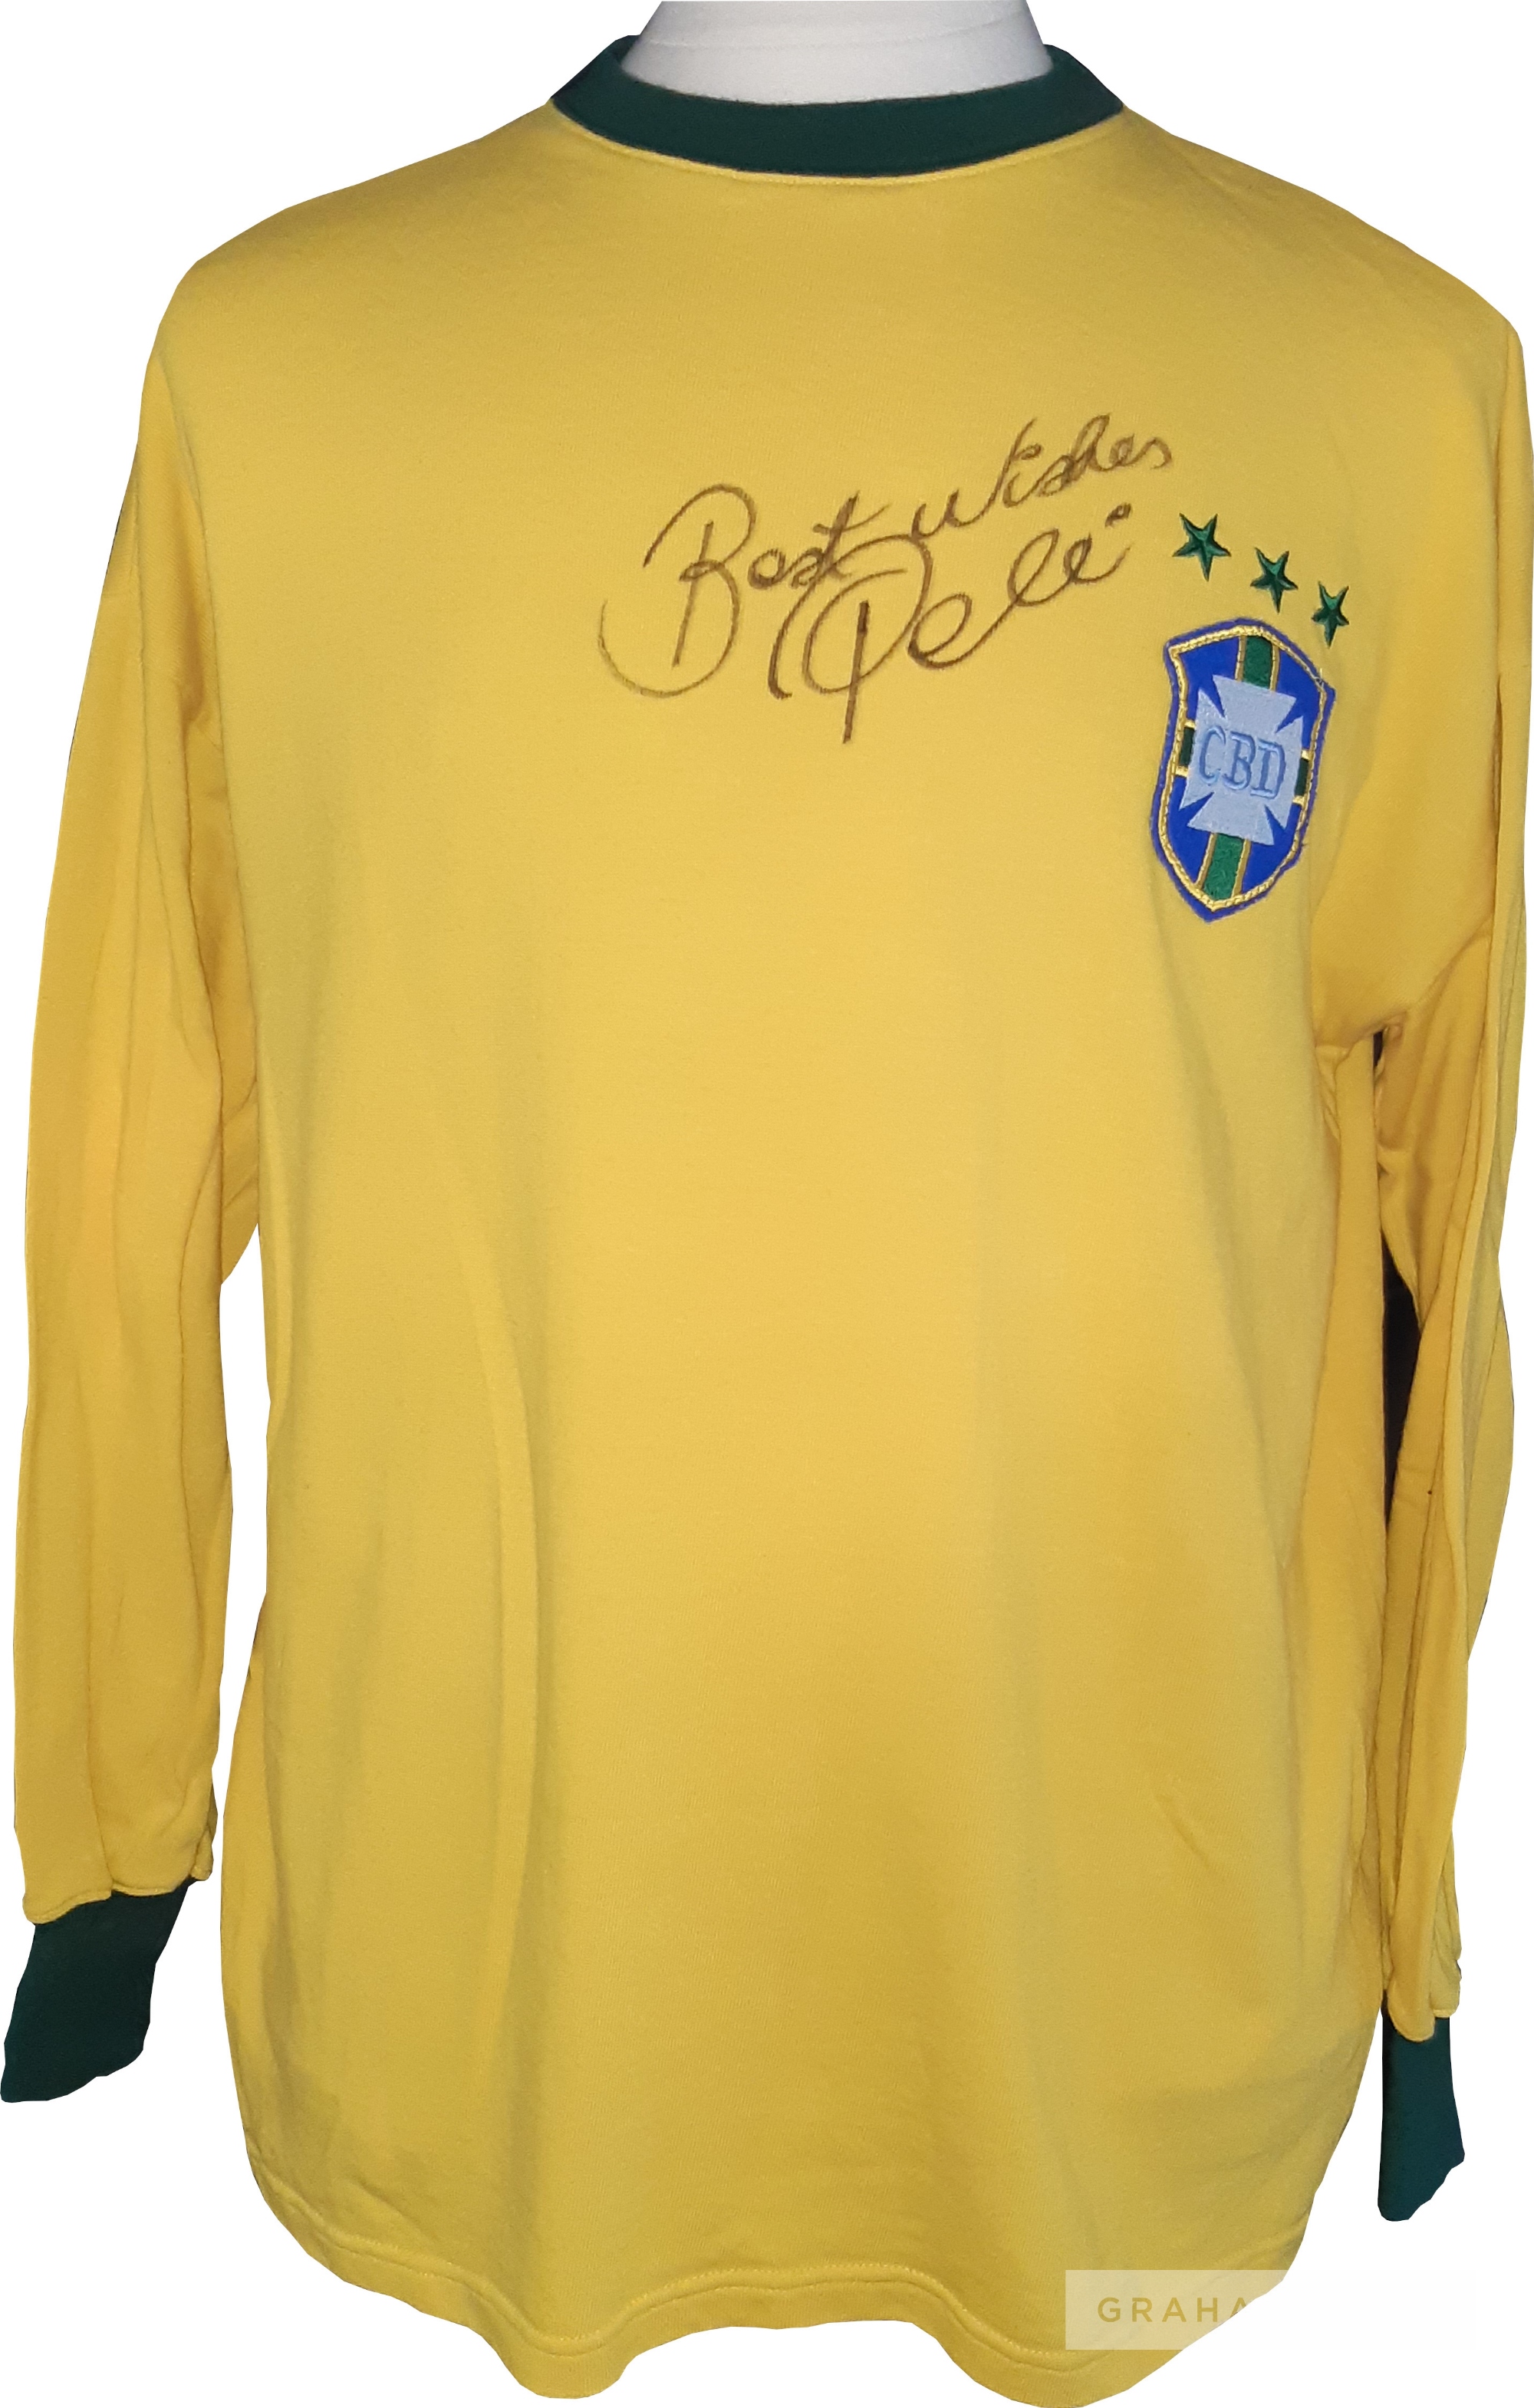 Pele signed yellow Brazil retro jersey 1970 Mexico World Cup, Toffs brand, long-sleeved, with